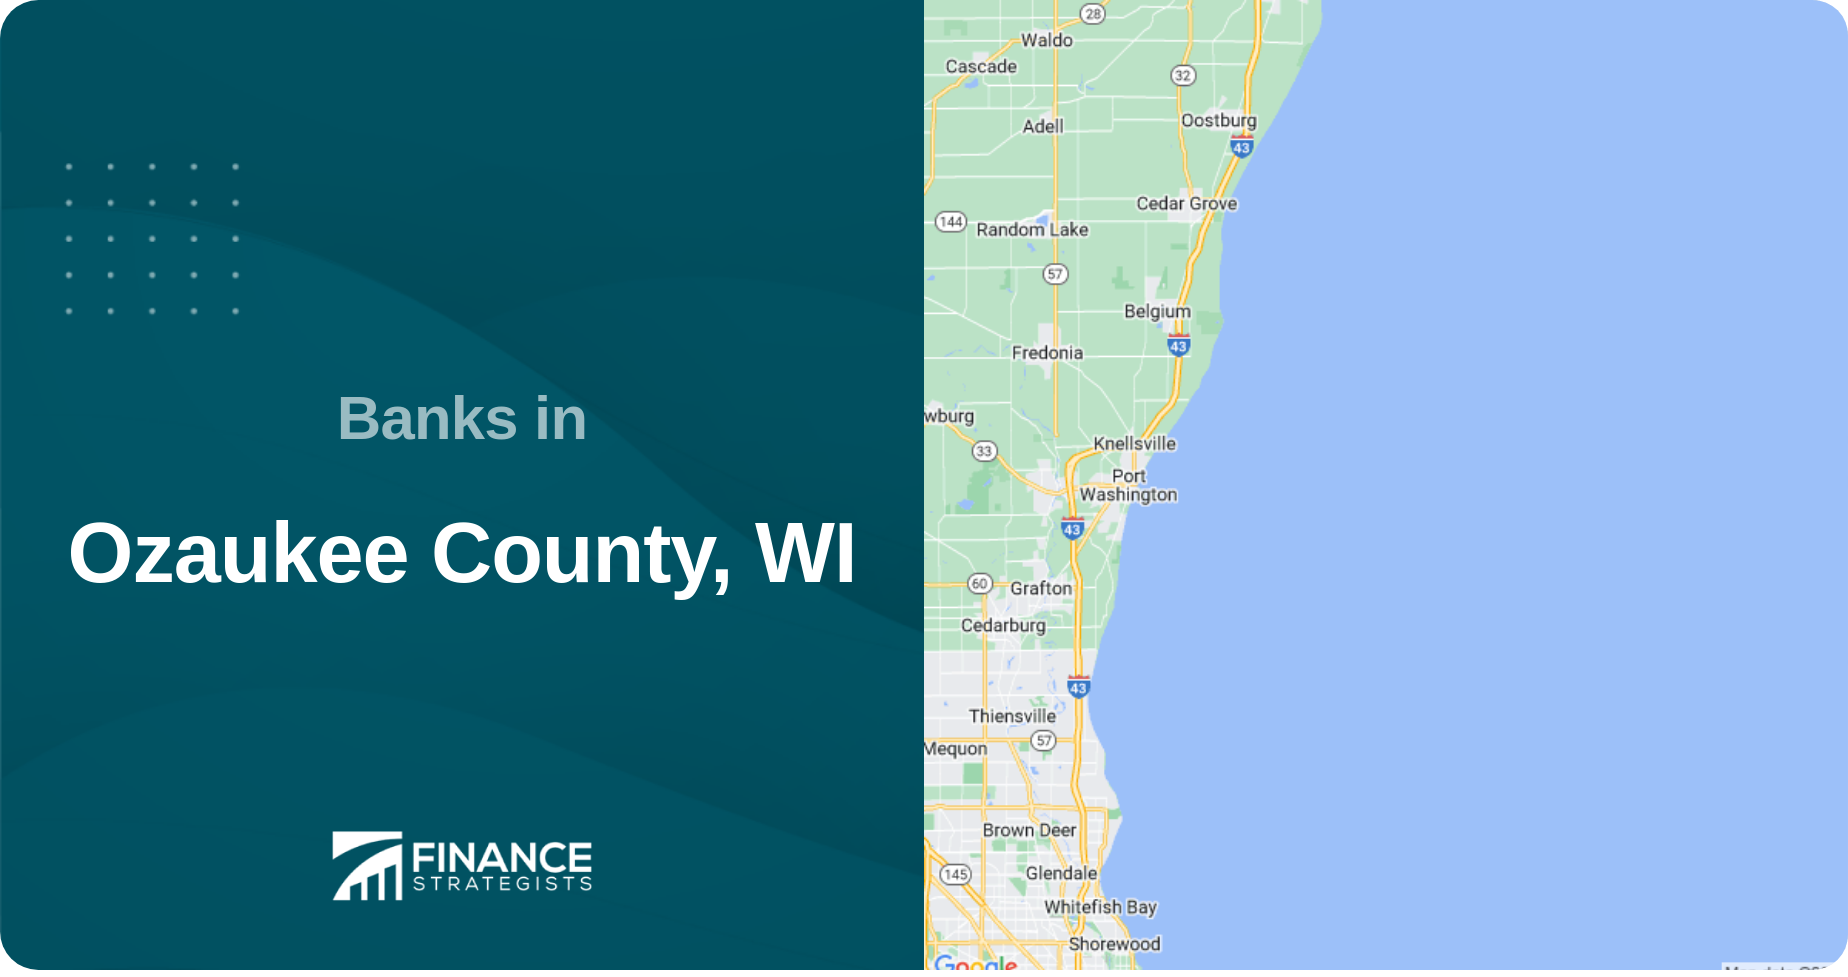 Banks in Ozaukee County, WI